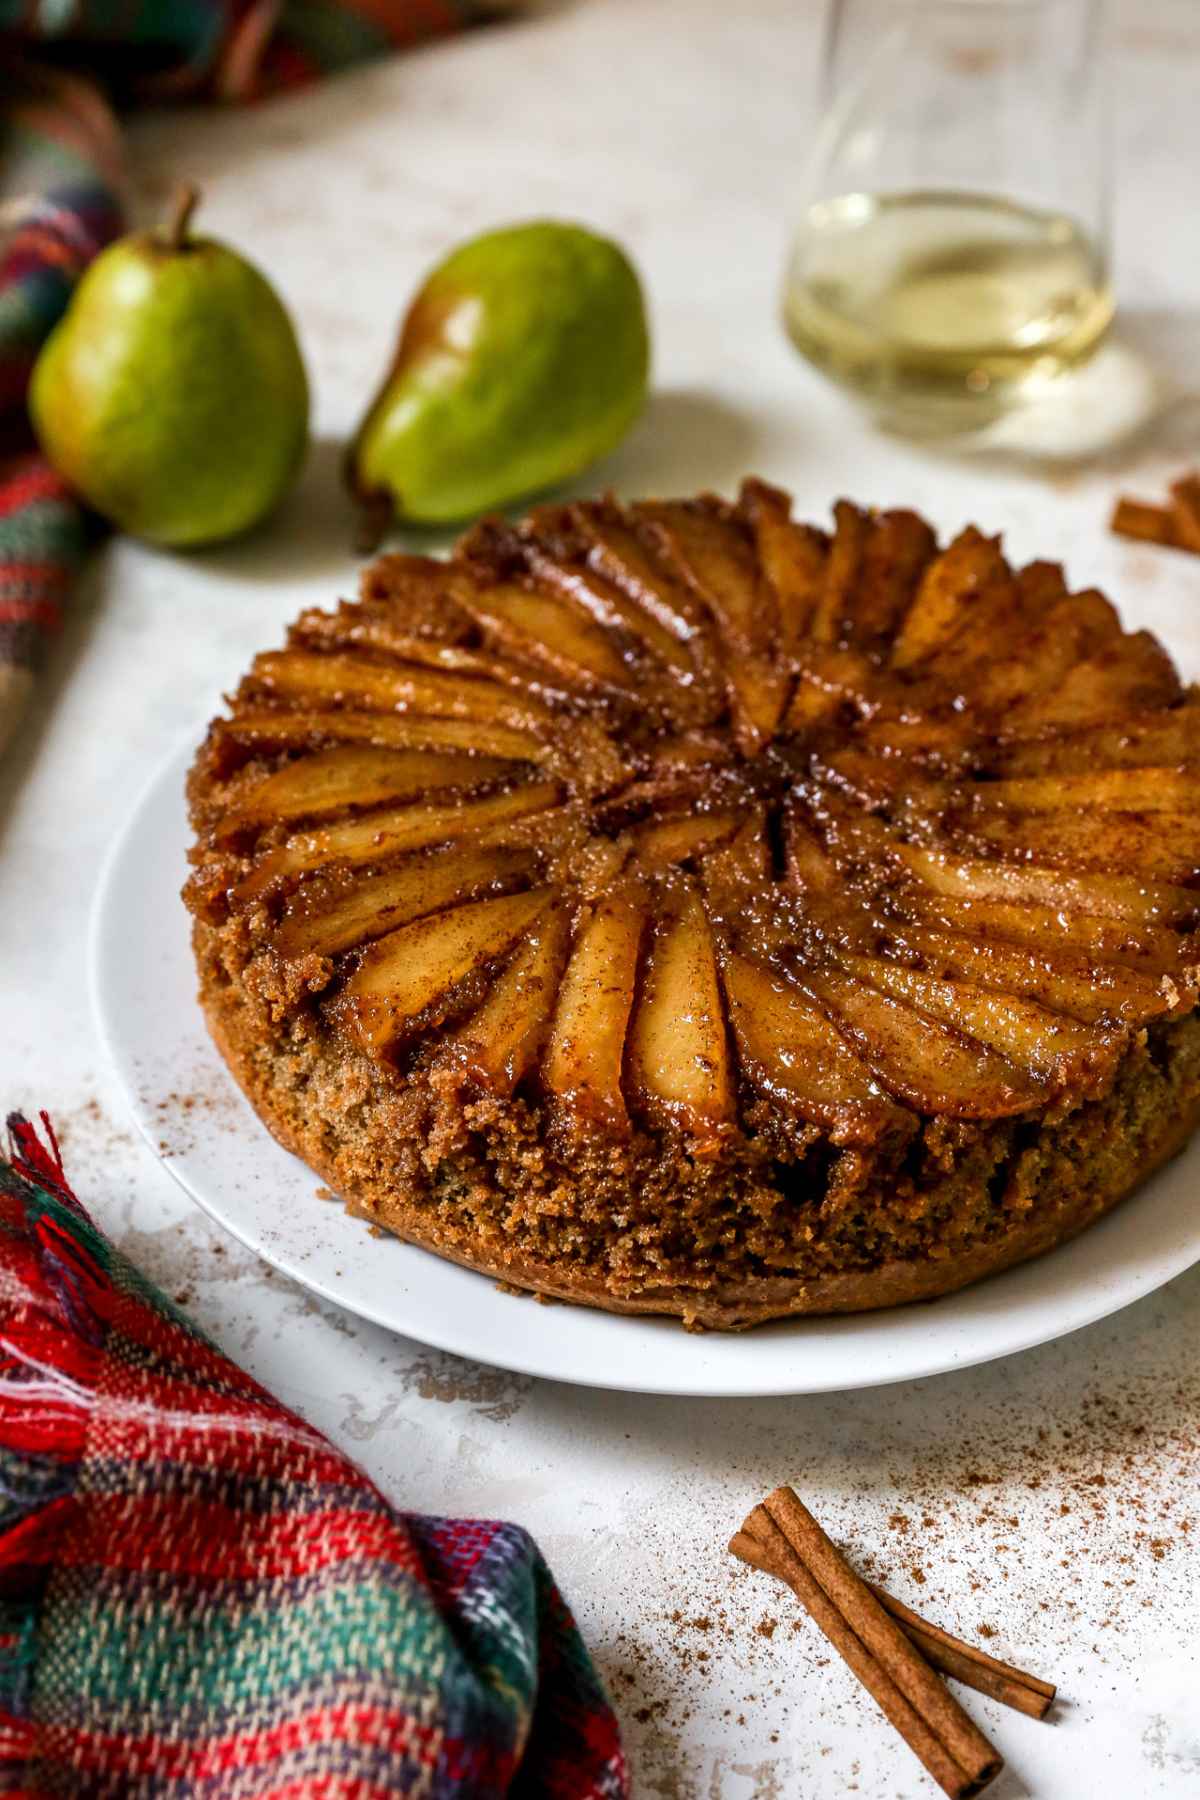 Upside down pear cake on a white serving plate.